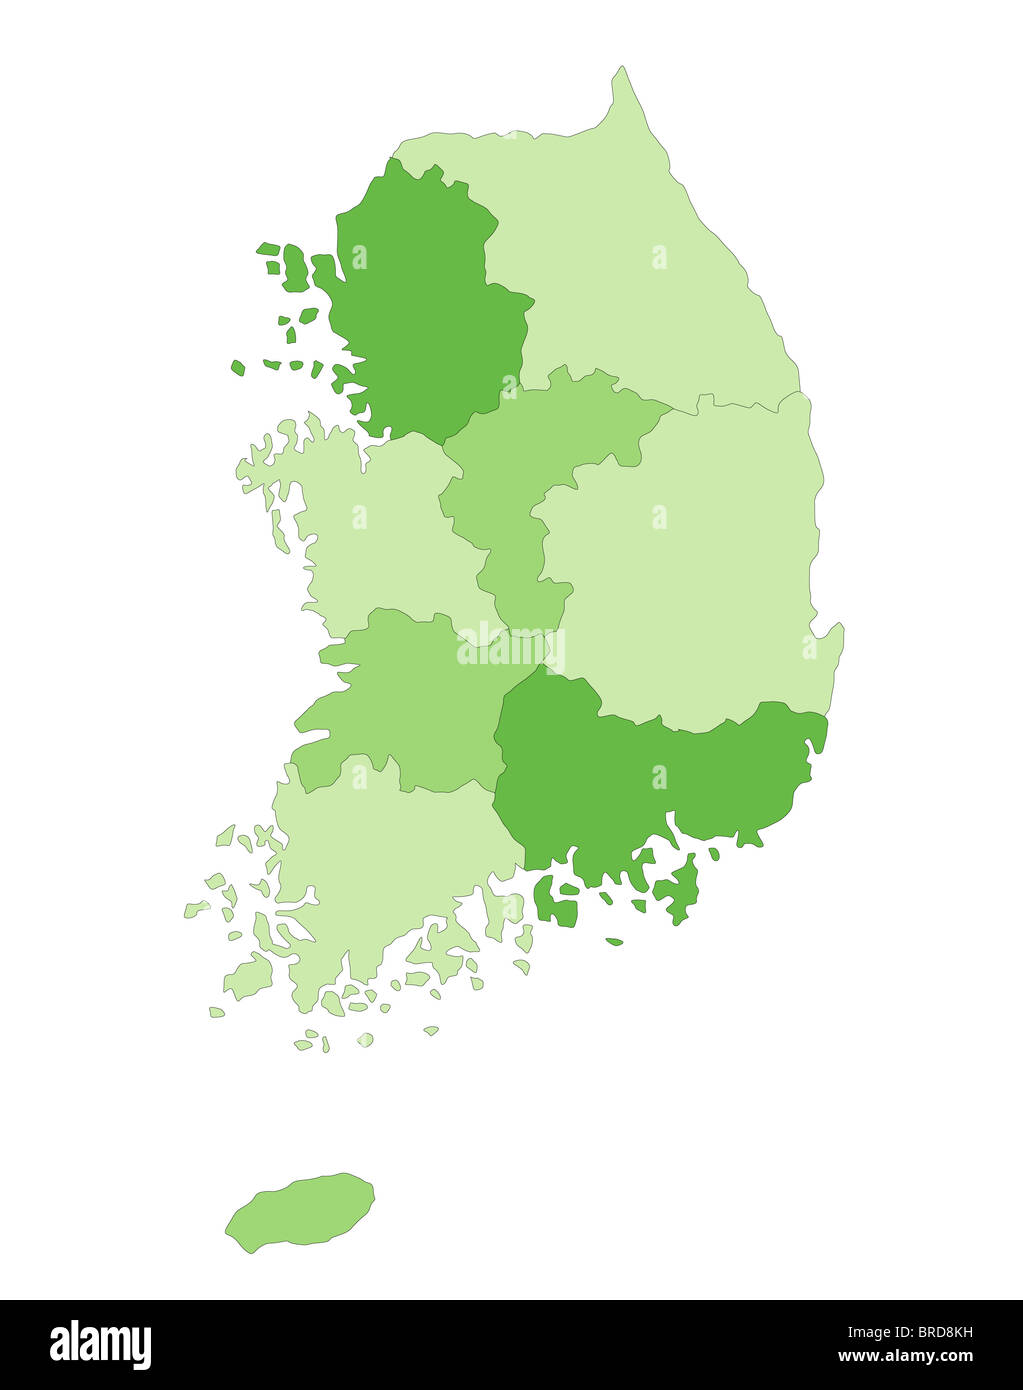 Stylized map of South Korea in green tone showing the different provinces. Stock Photo